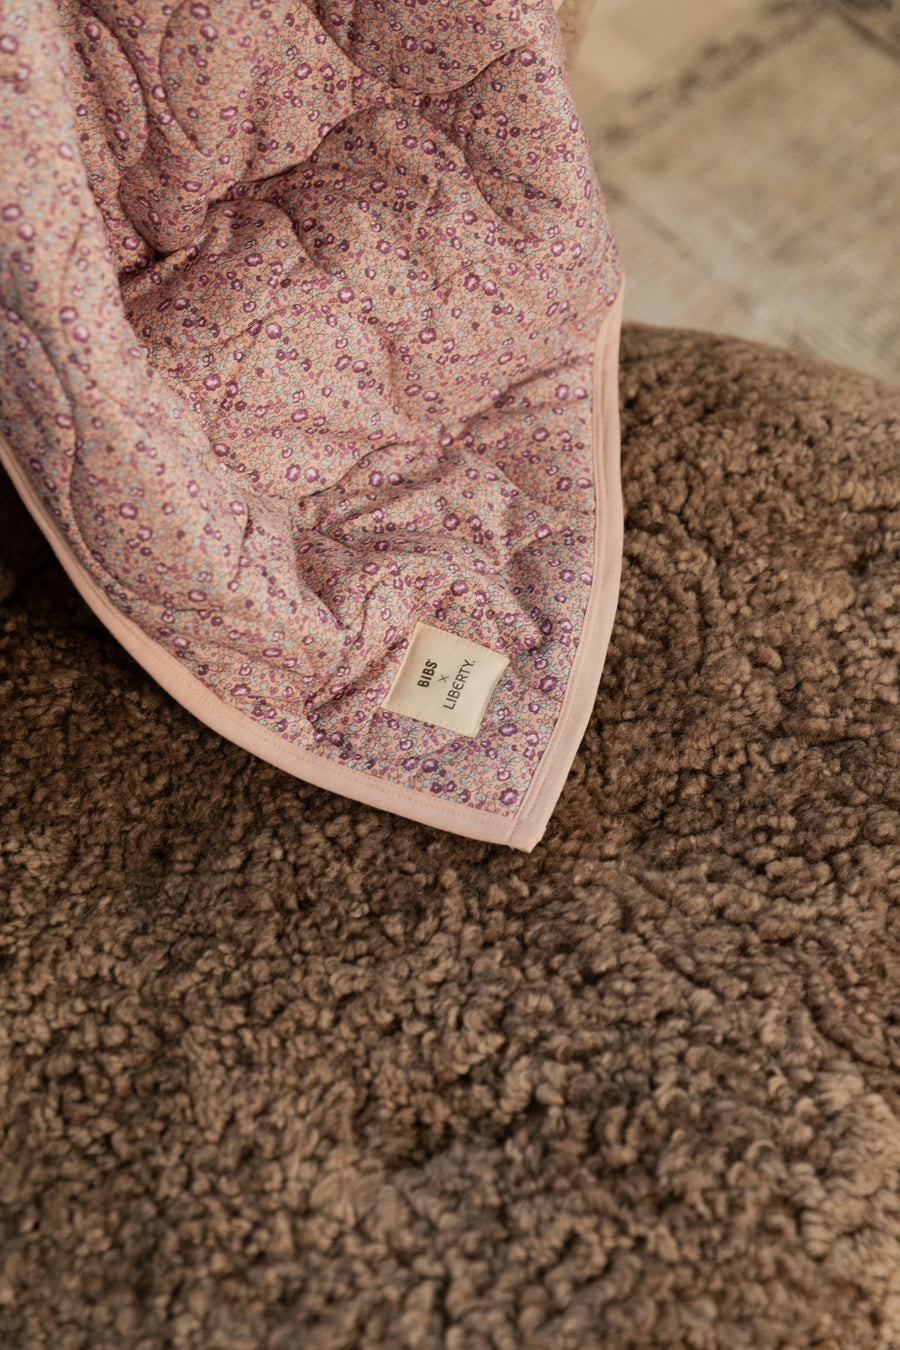 BIBS x LIBERTY Quilted Blanket - Eloise/Blush